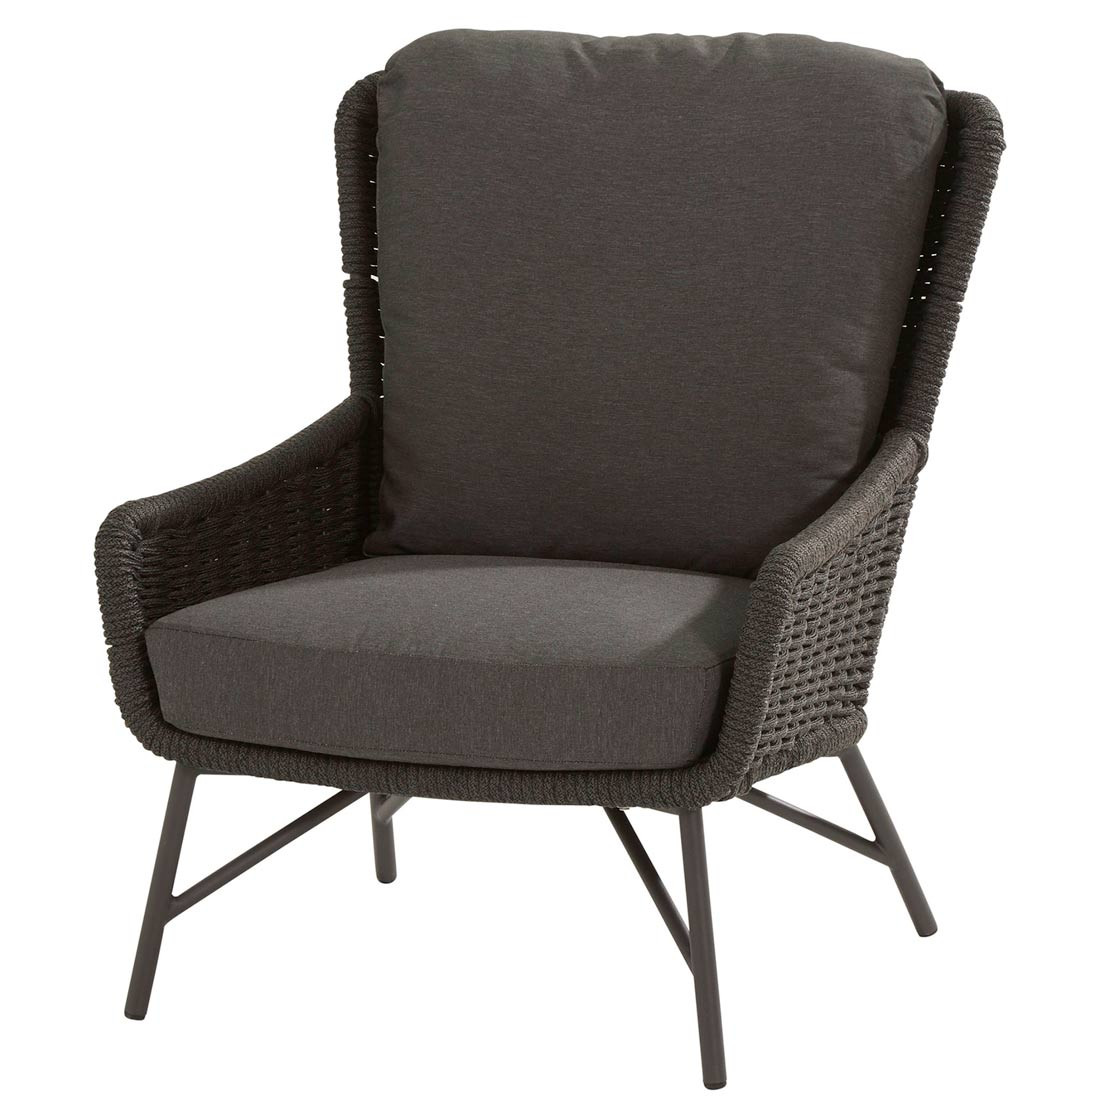 Wing living chair with 2 cushions